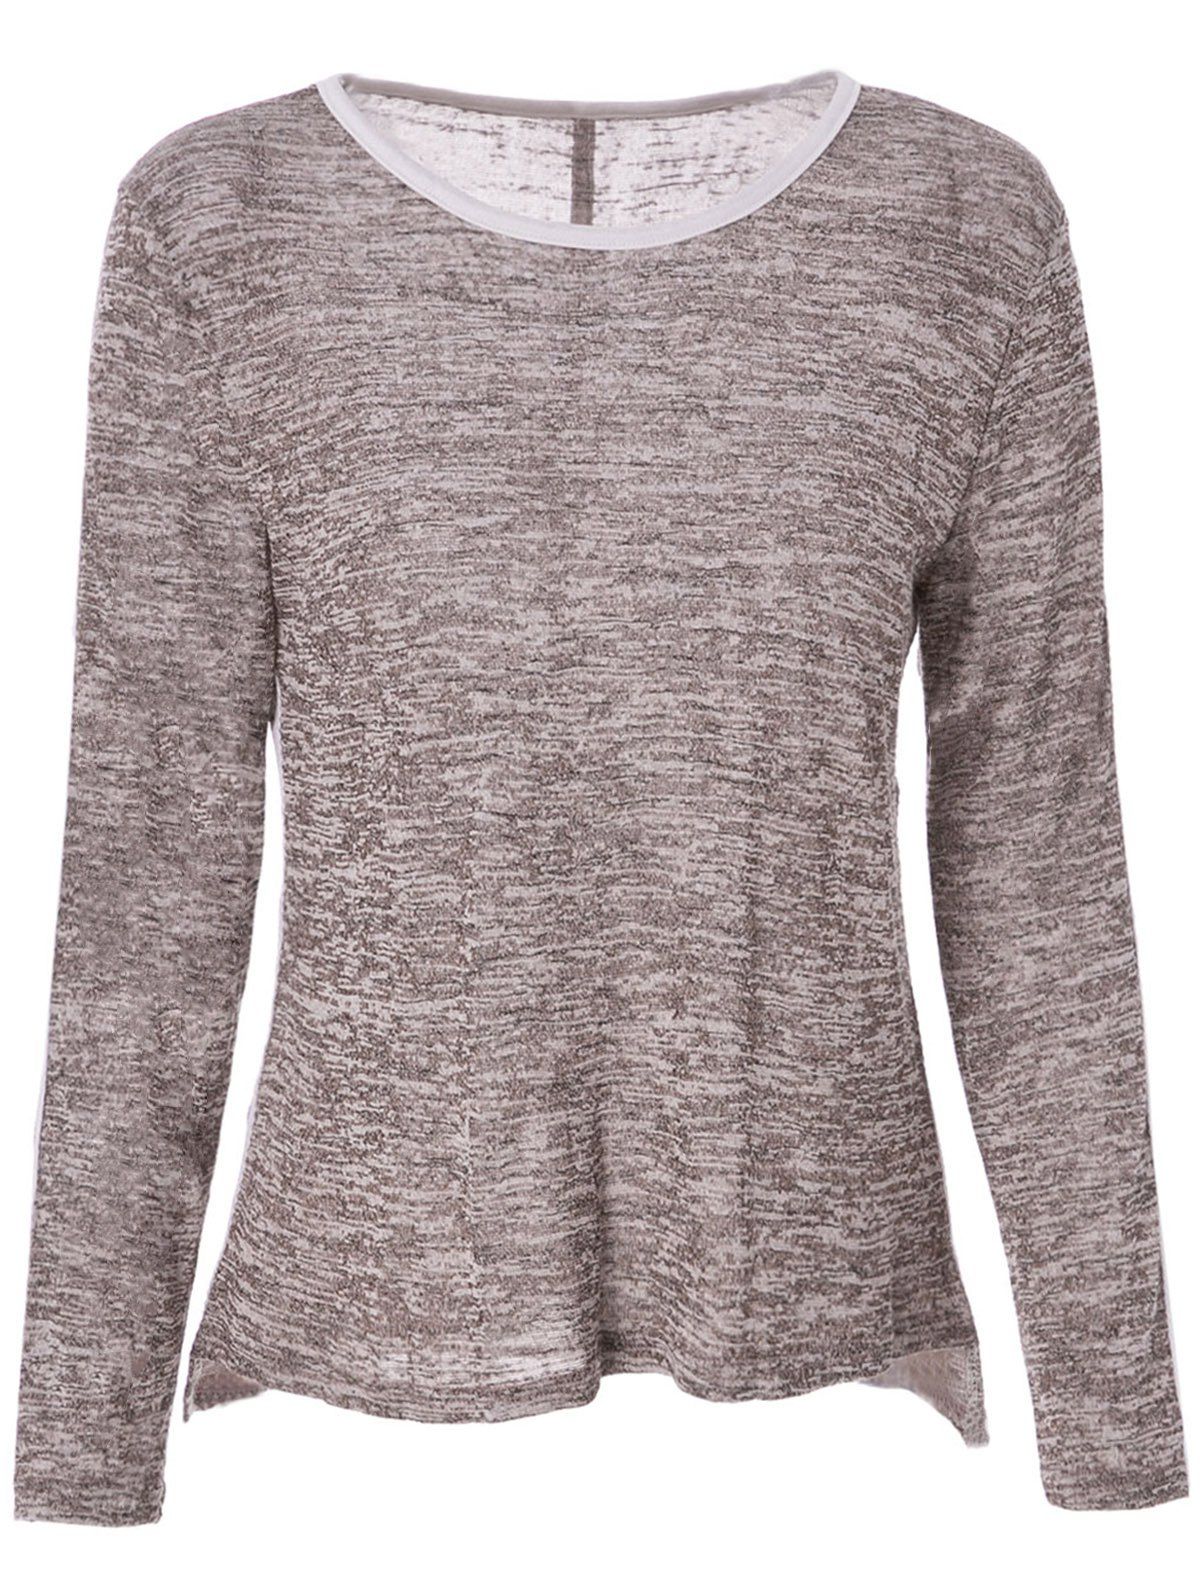 2018 Chic Round Neck Long Sleeve Snow Design T-Shirt For Women GRAY XL ...